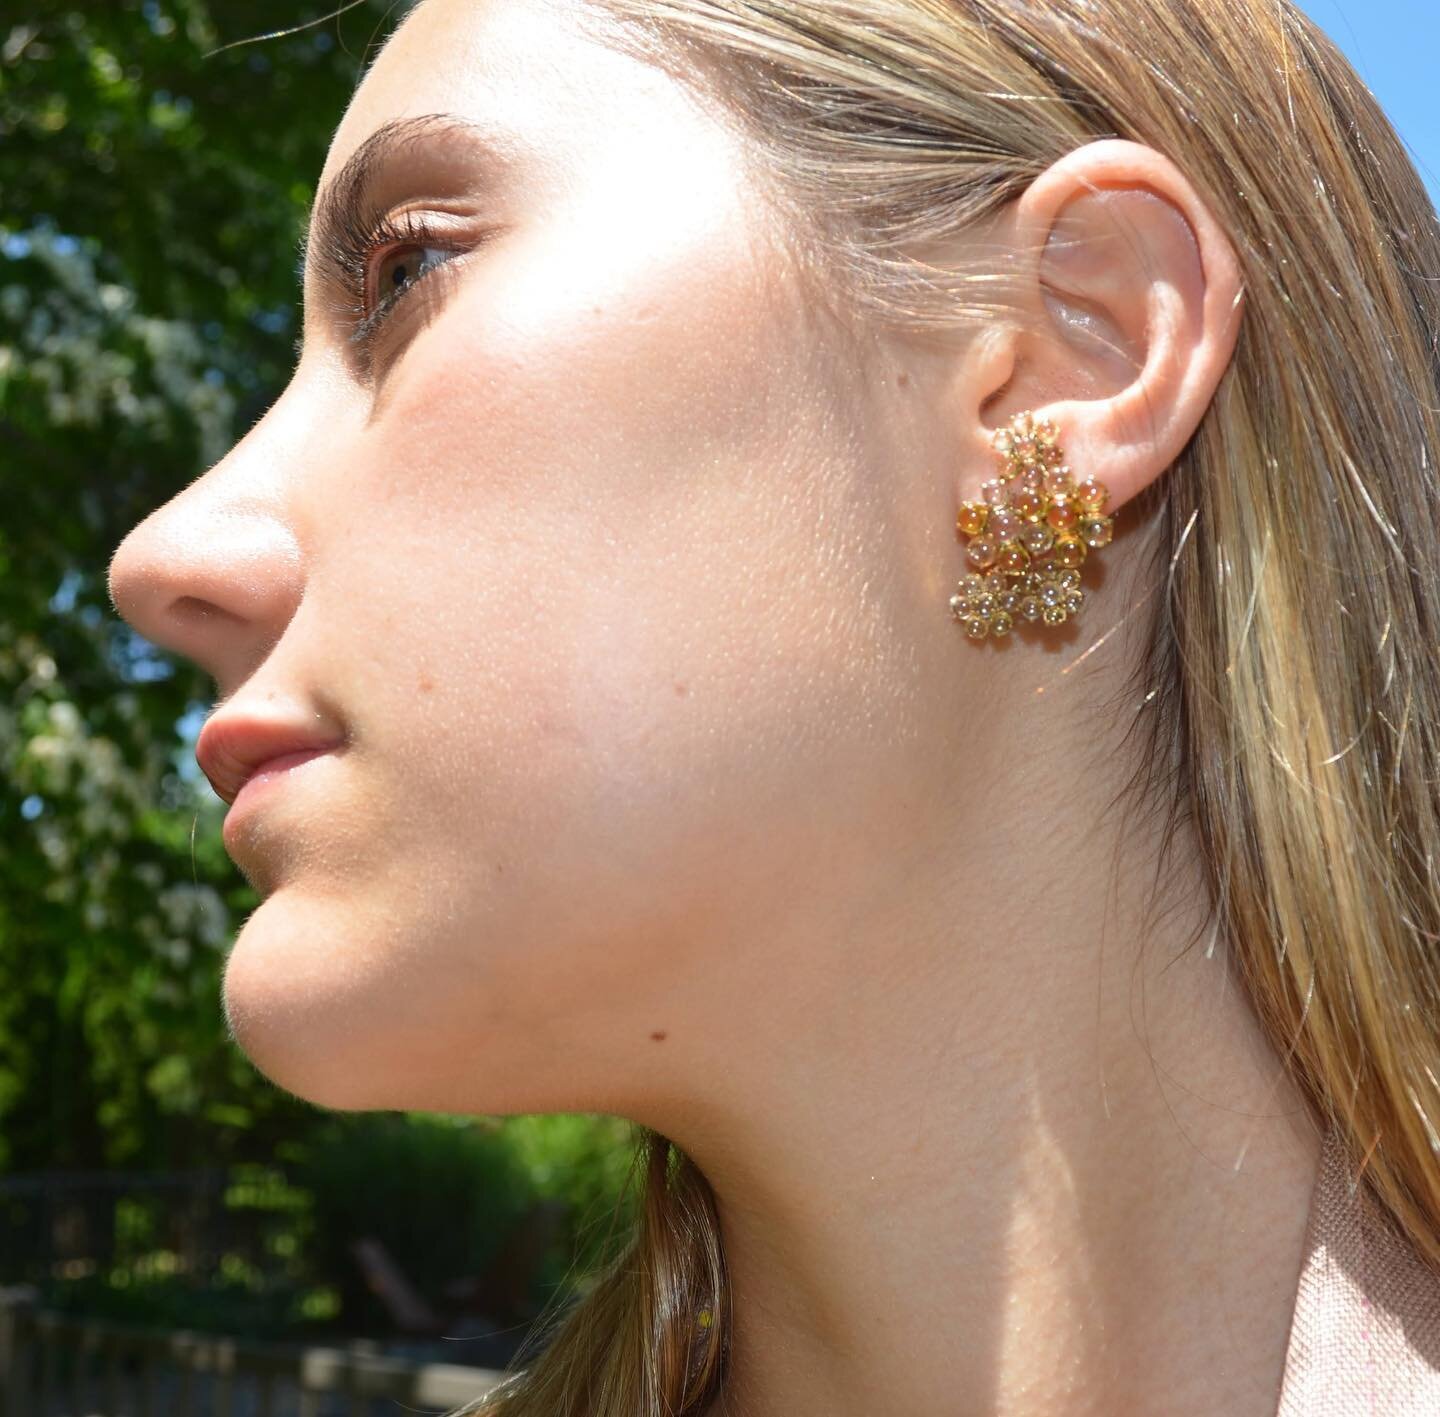 Yellow sapphire earrings are perfect for sunny summer days 🌻 18k yellow gold #finejewelry #jewelry #sapphire #yellowsapphire #gems #summerjewelry #yellowjewelry